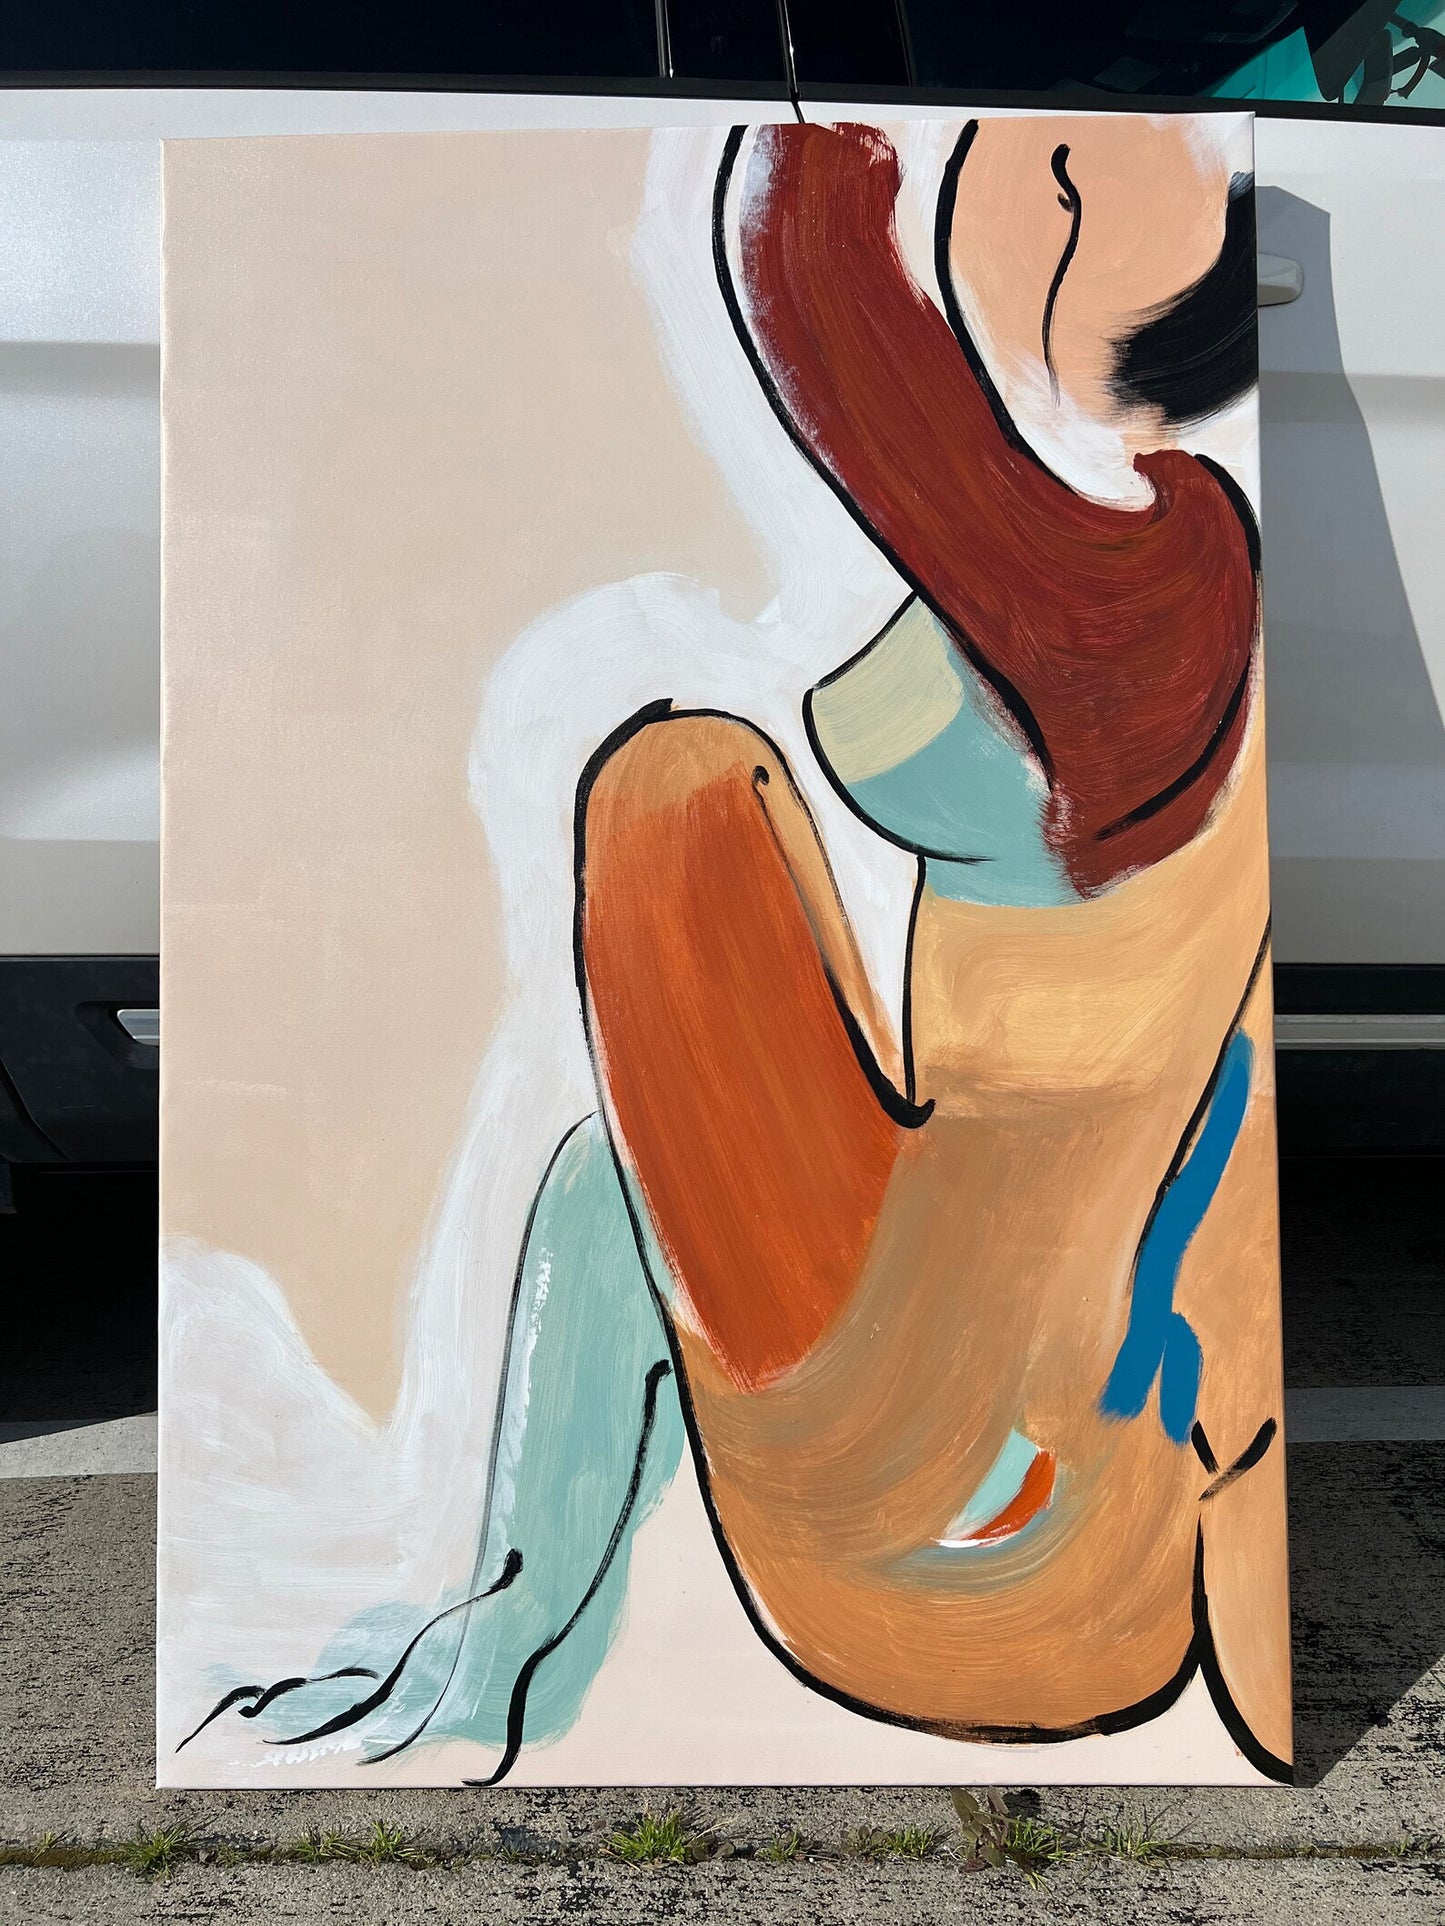 Hand-painted Art "Abstract woman nude" Modern Oil Painting, Wall art for living room, bedroom, office - Wrapped Canvas Painting